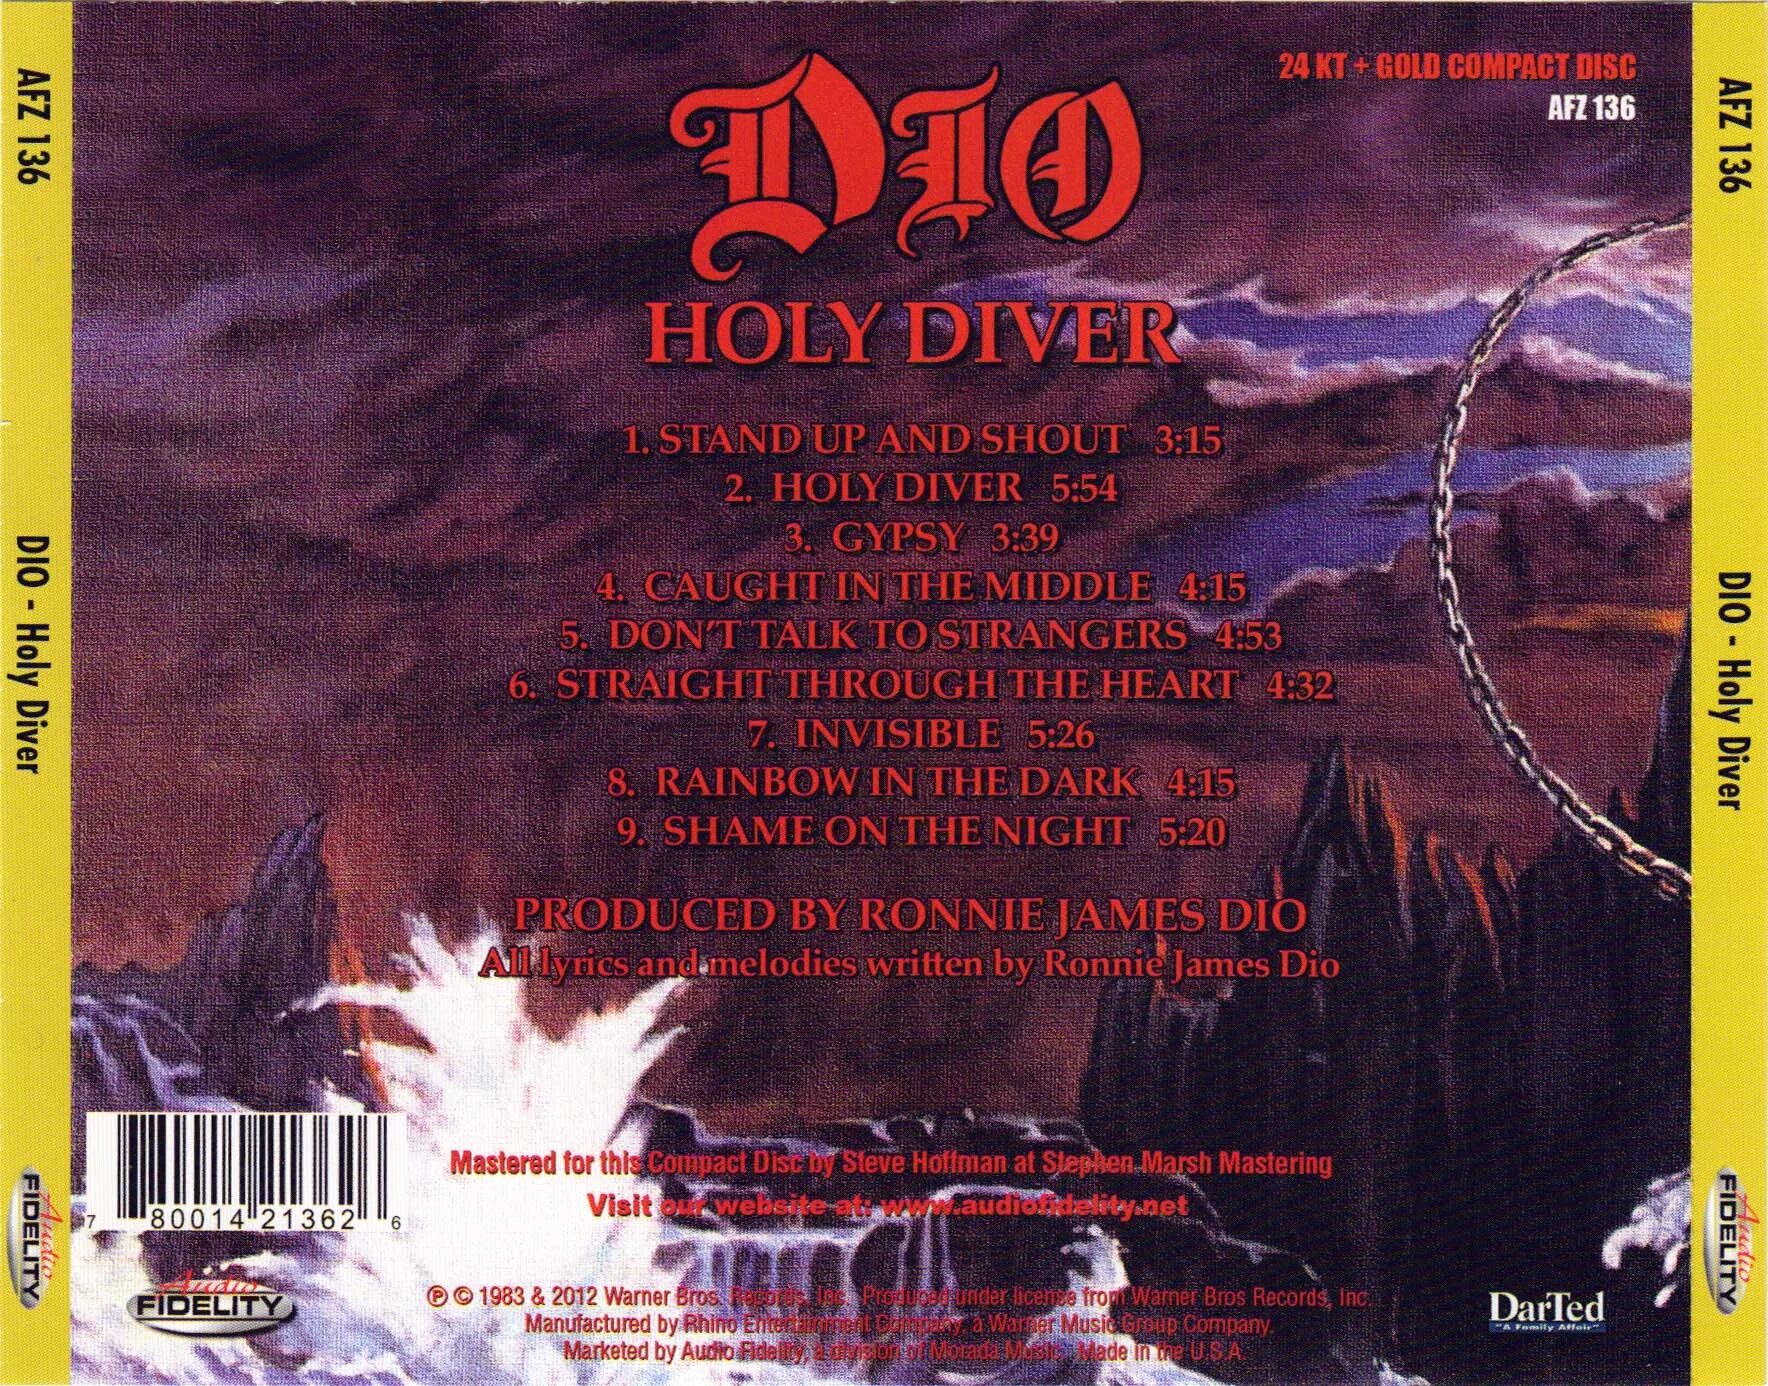 Dio Band 1983. Dio - Holy Diver (1983) CD. Dio Holy Diver 1983 обложка. Дио Holy Diver альбом. Dio текст